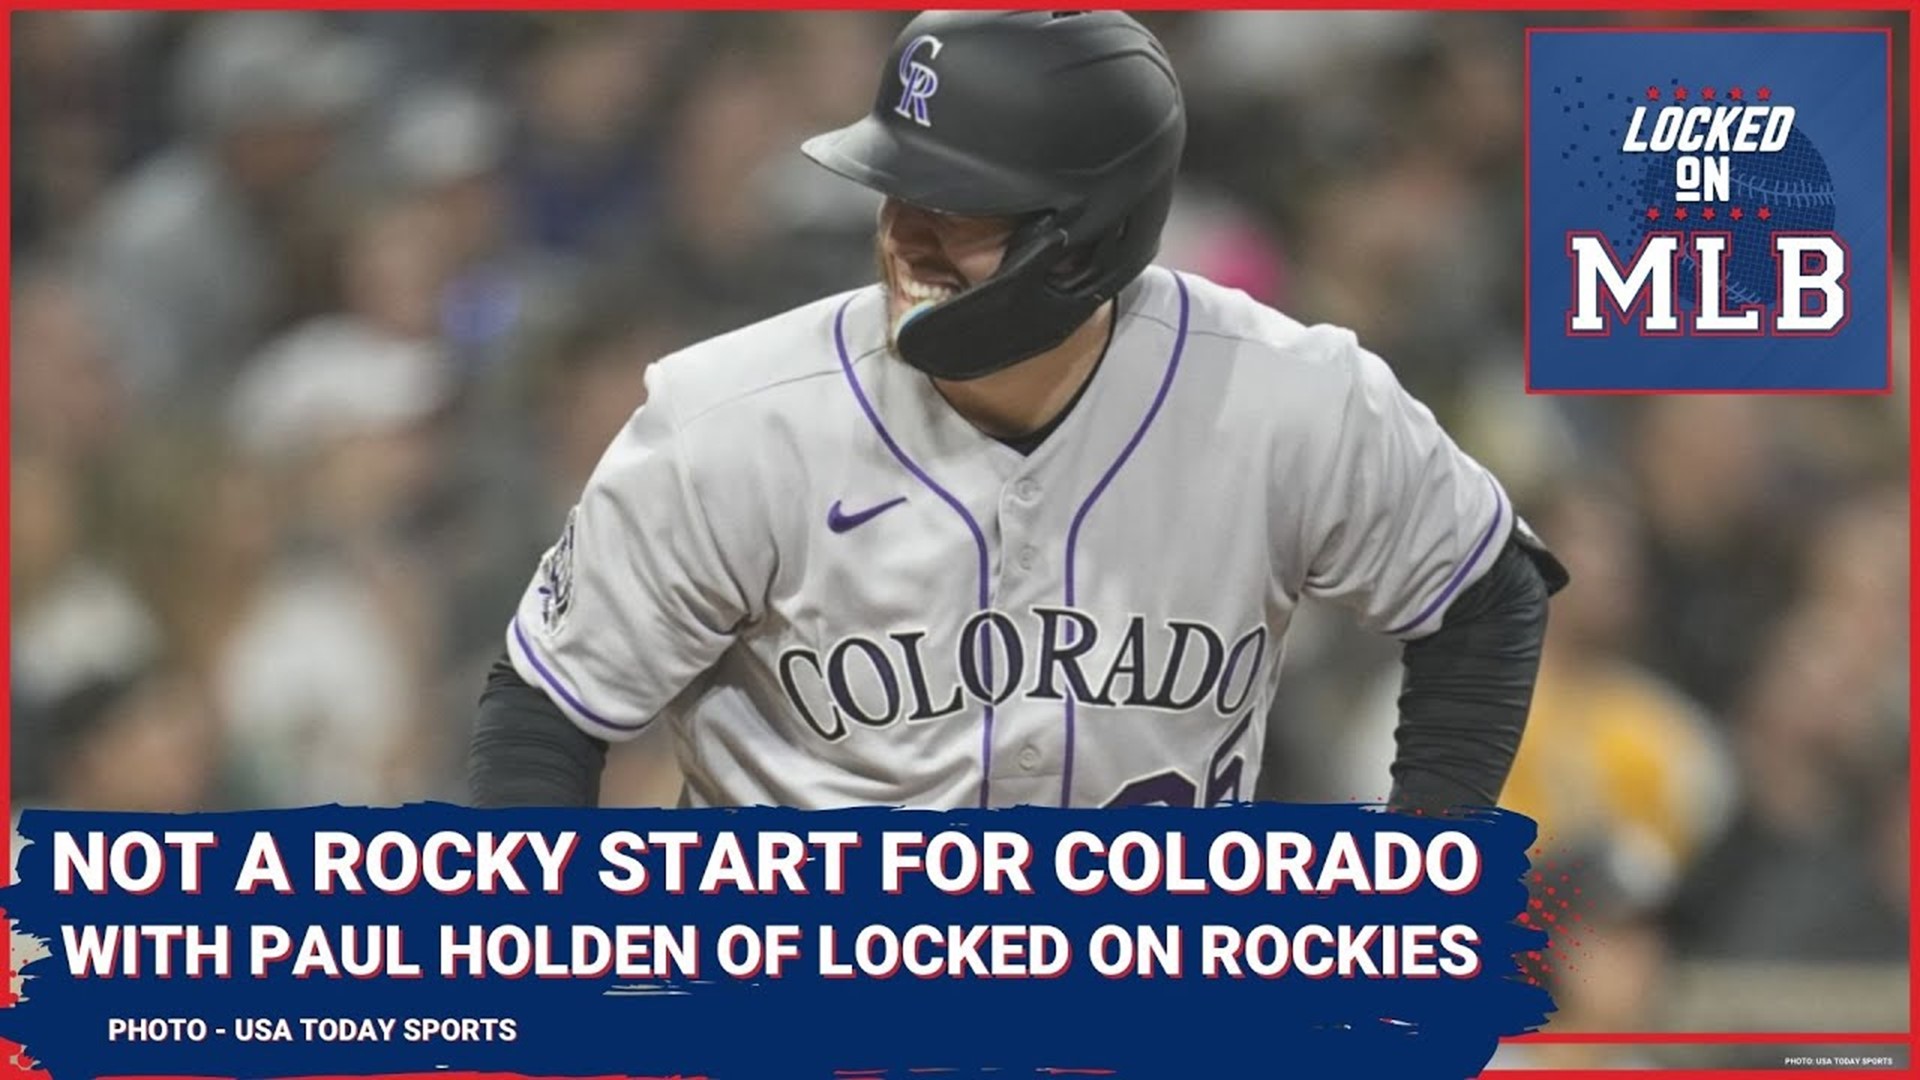 Locked on MLB - Glass Half Full After Four Games For Colorado with Paul Holden